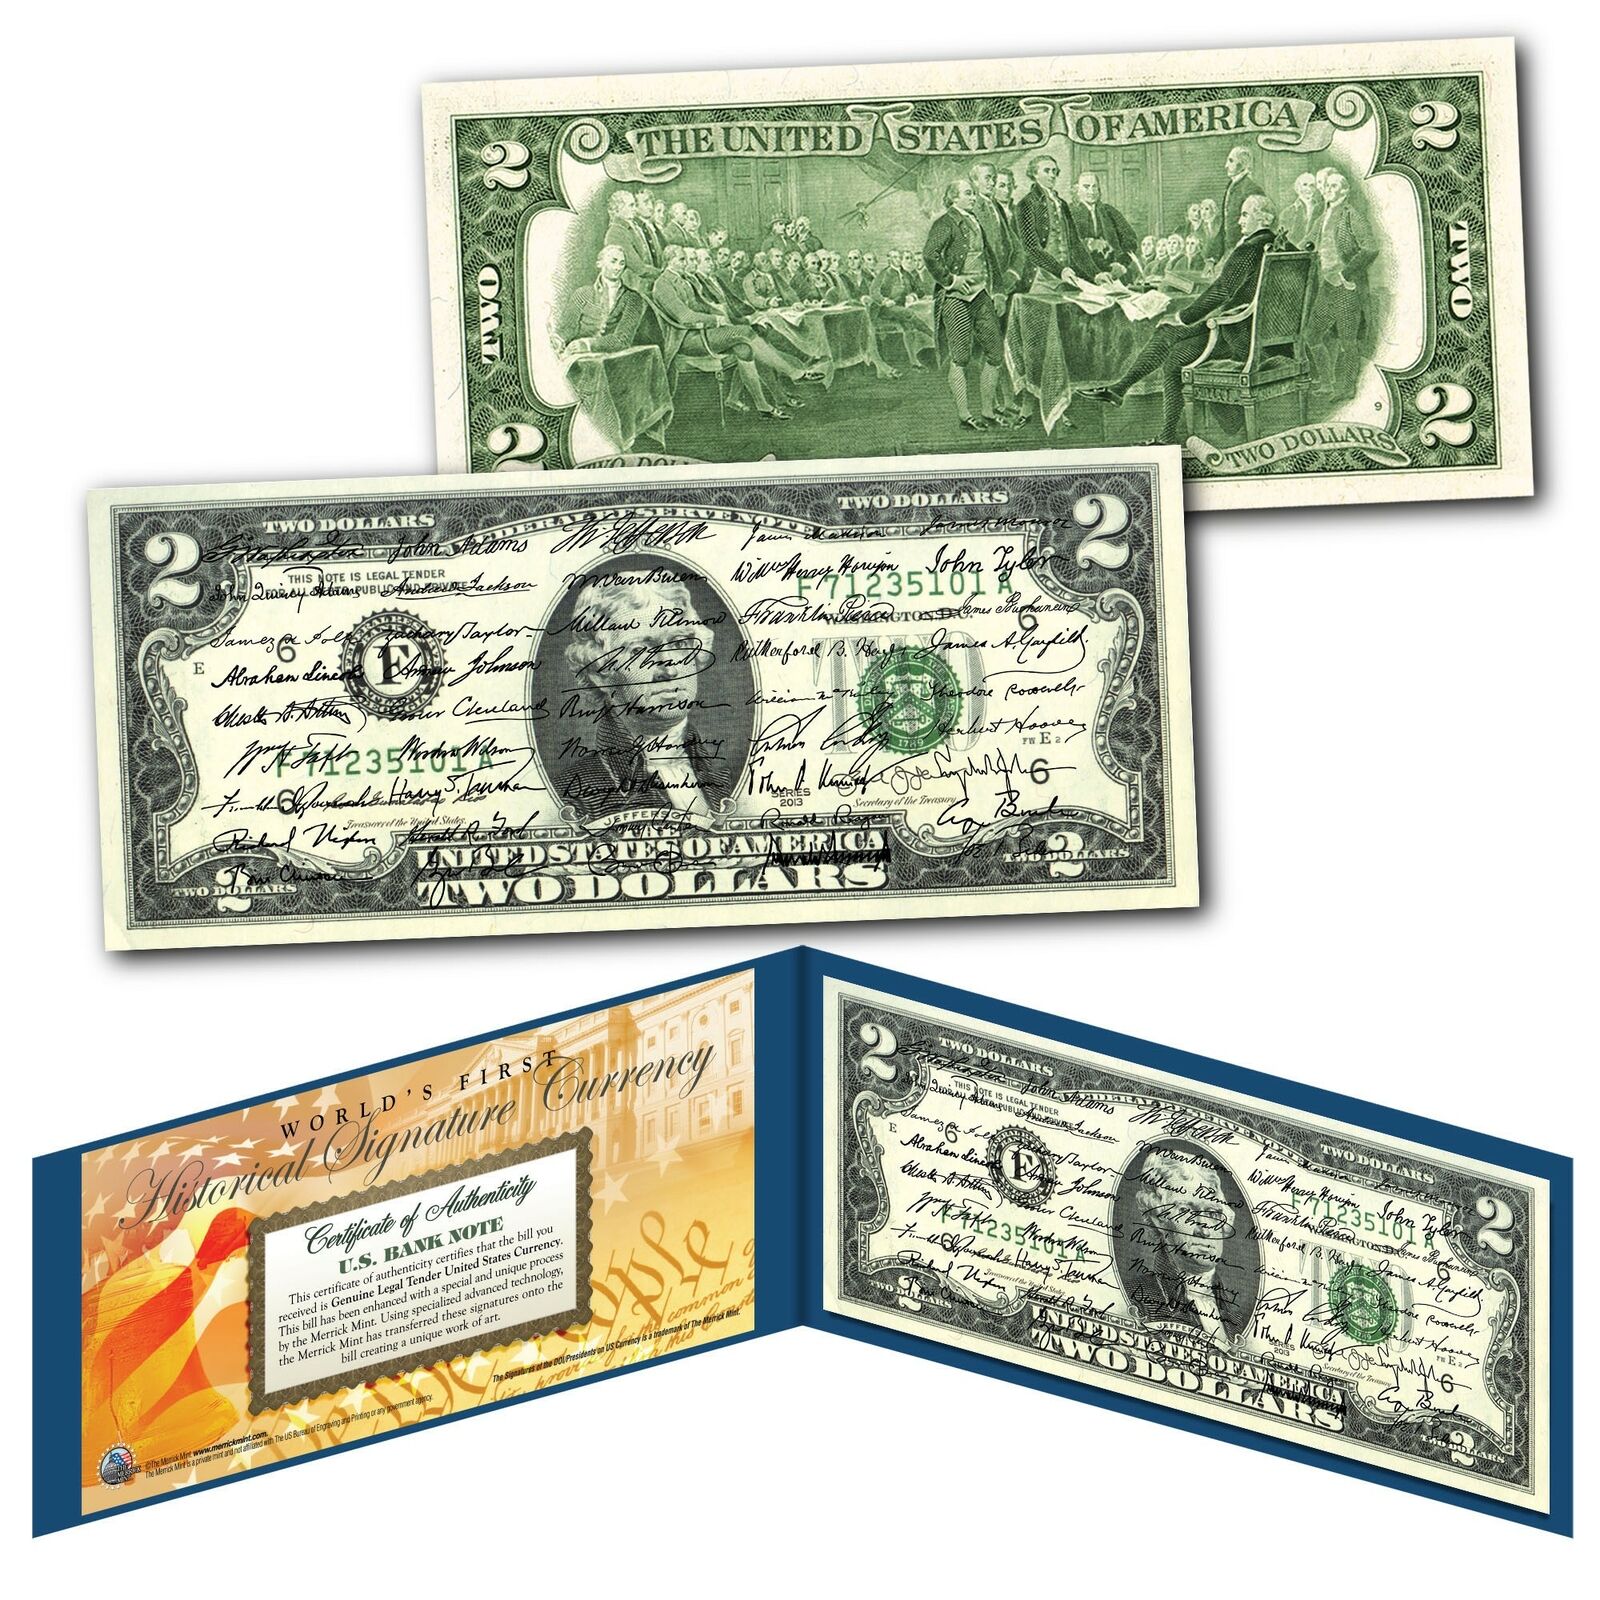 ALL 46 U.S. PRESIDENT SIGNATURES 2022 Genuine Legal Tender $2 Bill with Display